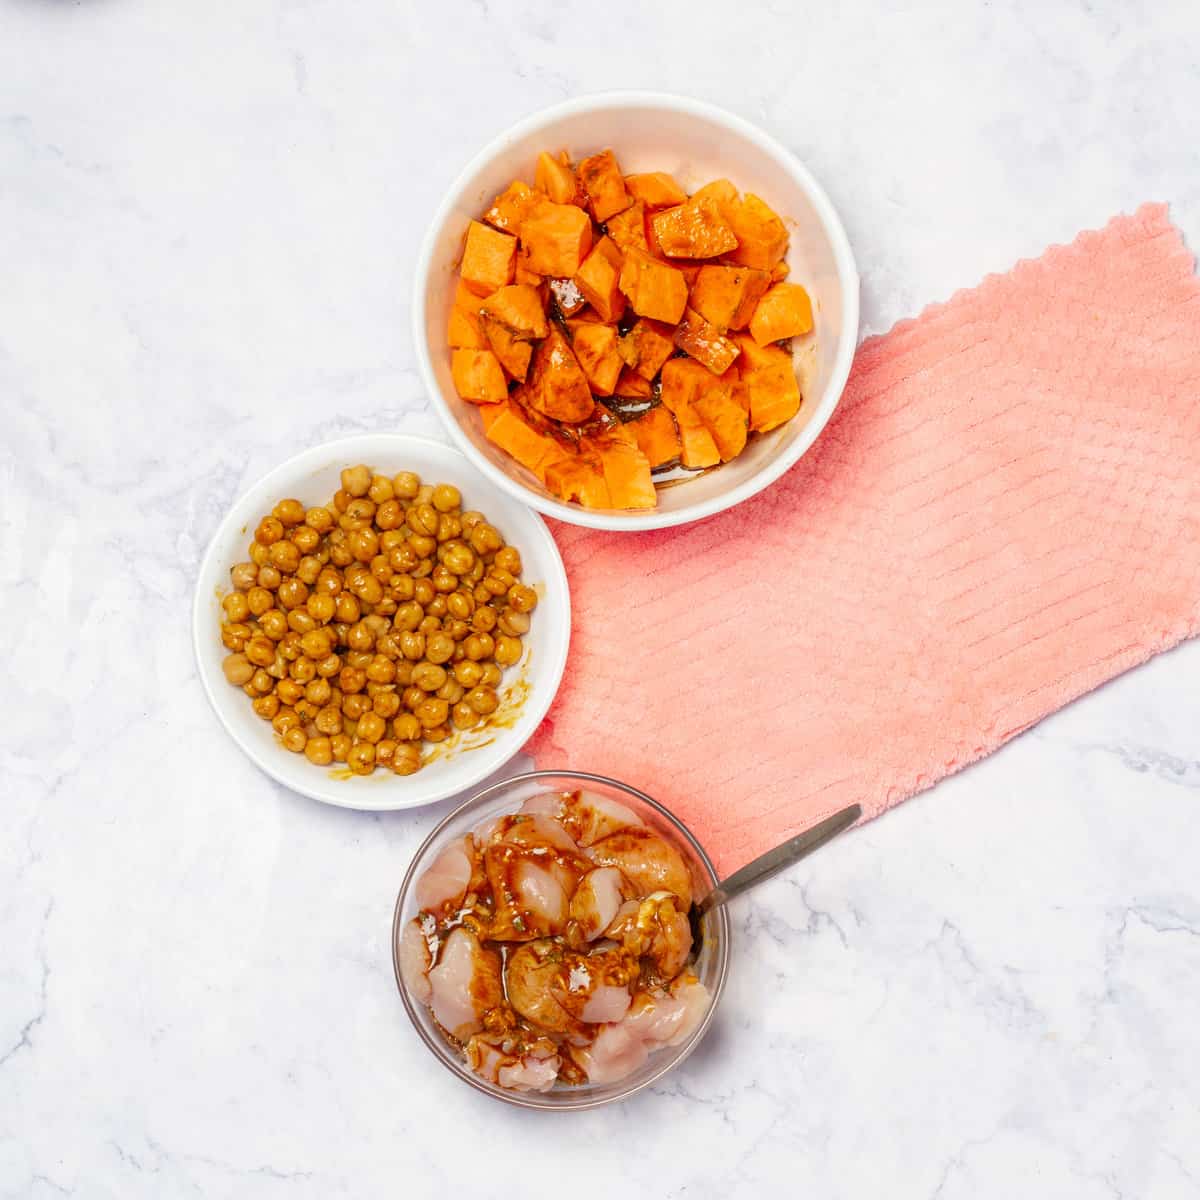 a bowl of marinated chicken cubes, chickpeas, and sweet potatoes